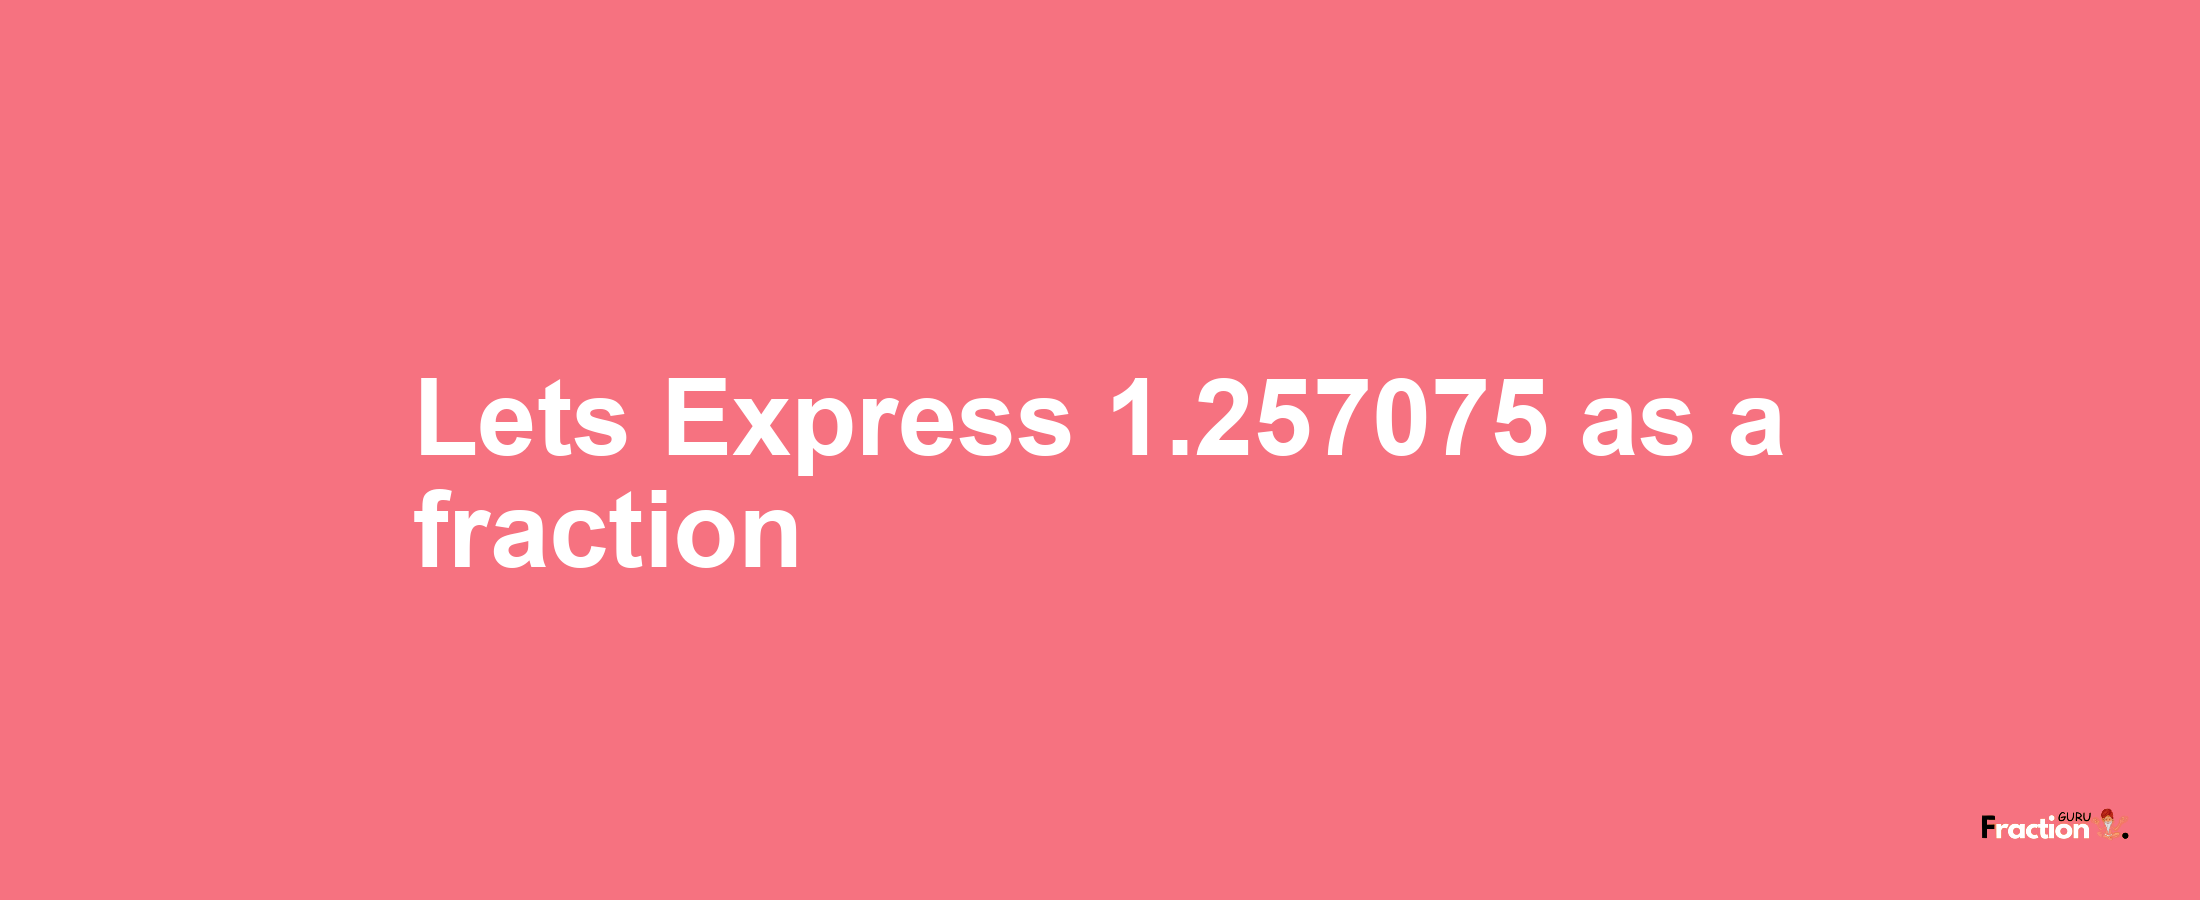 Lets Express 1.257075 as afraction